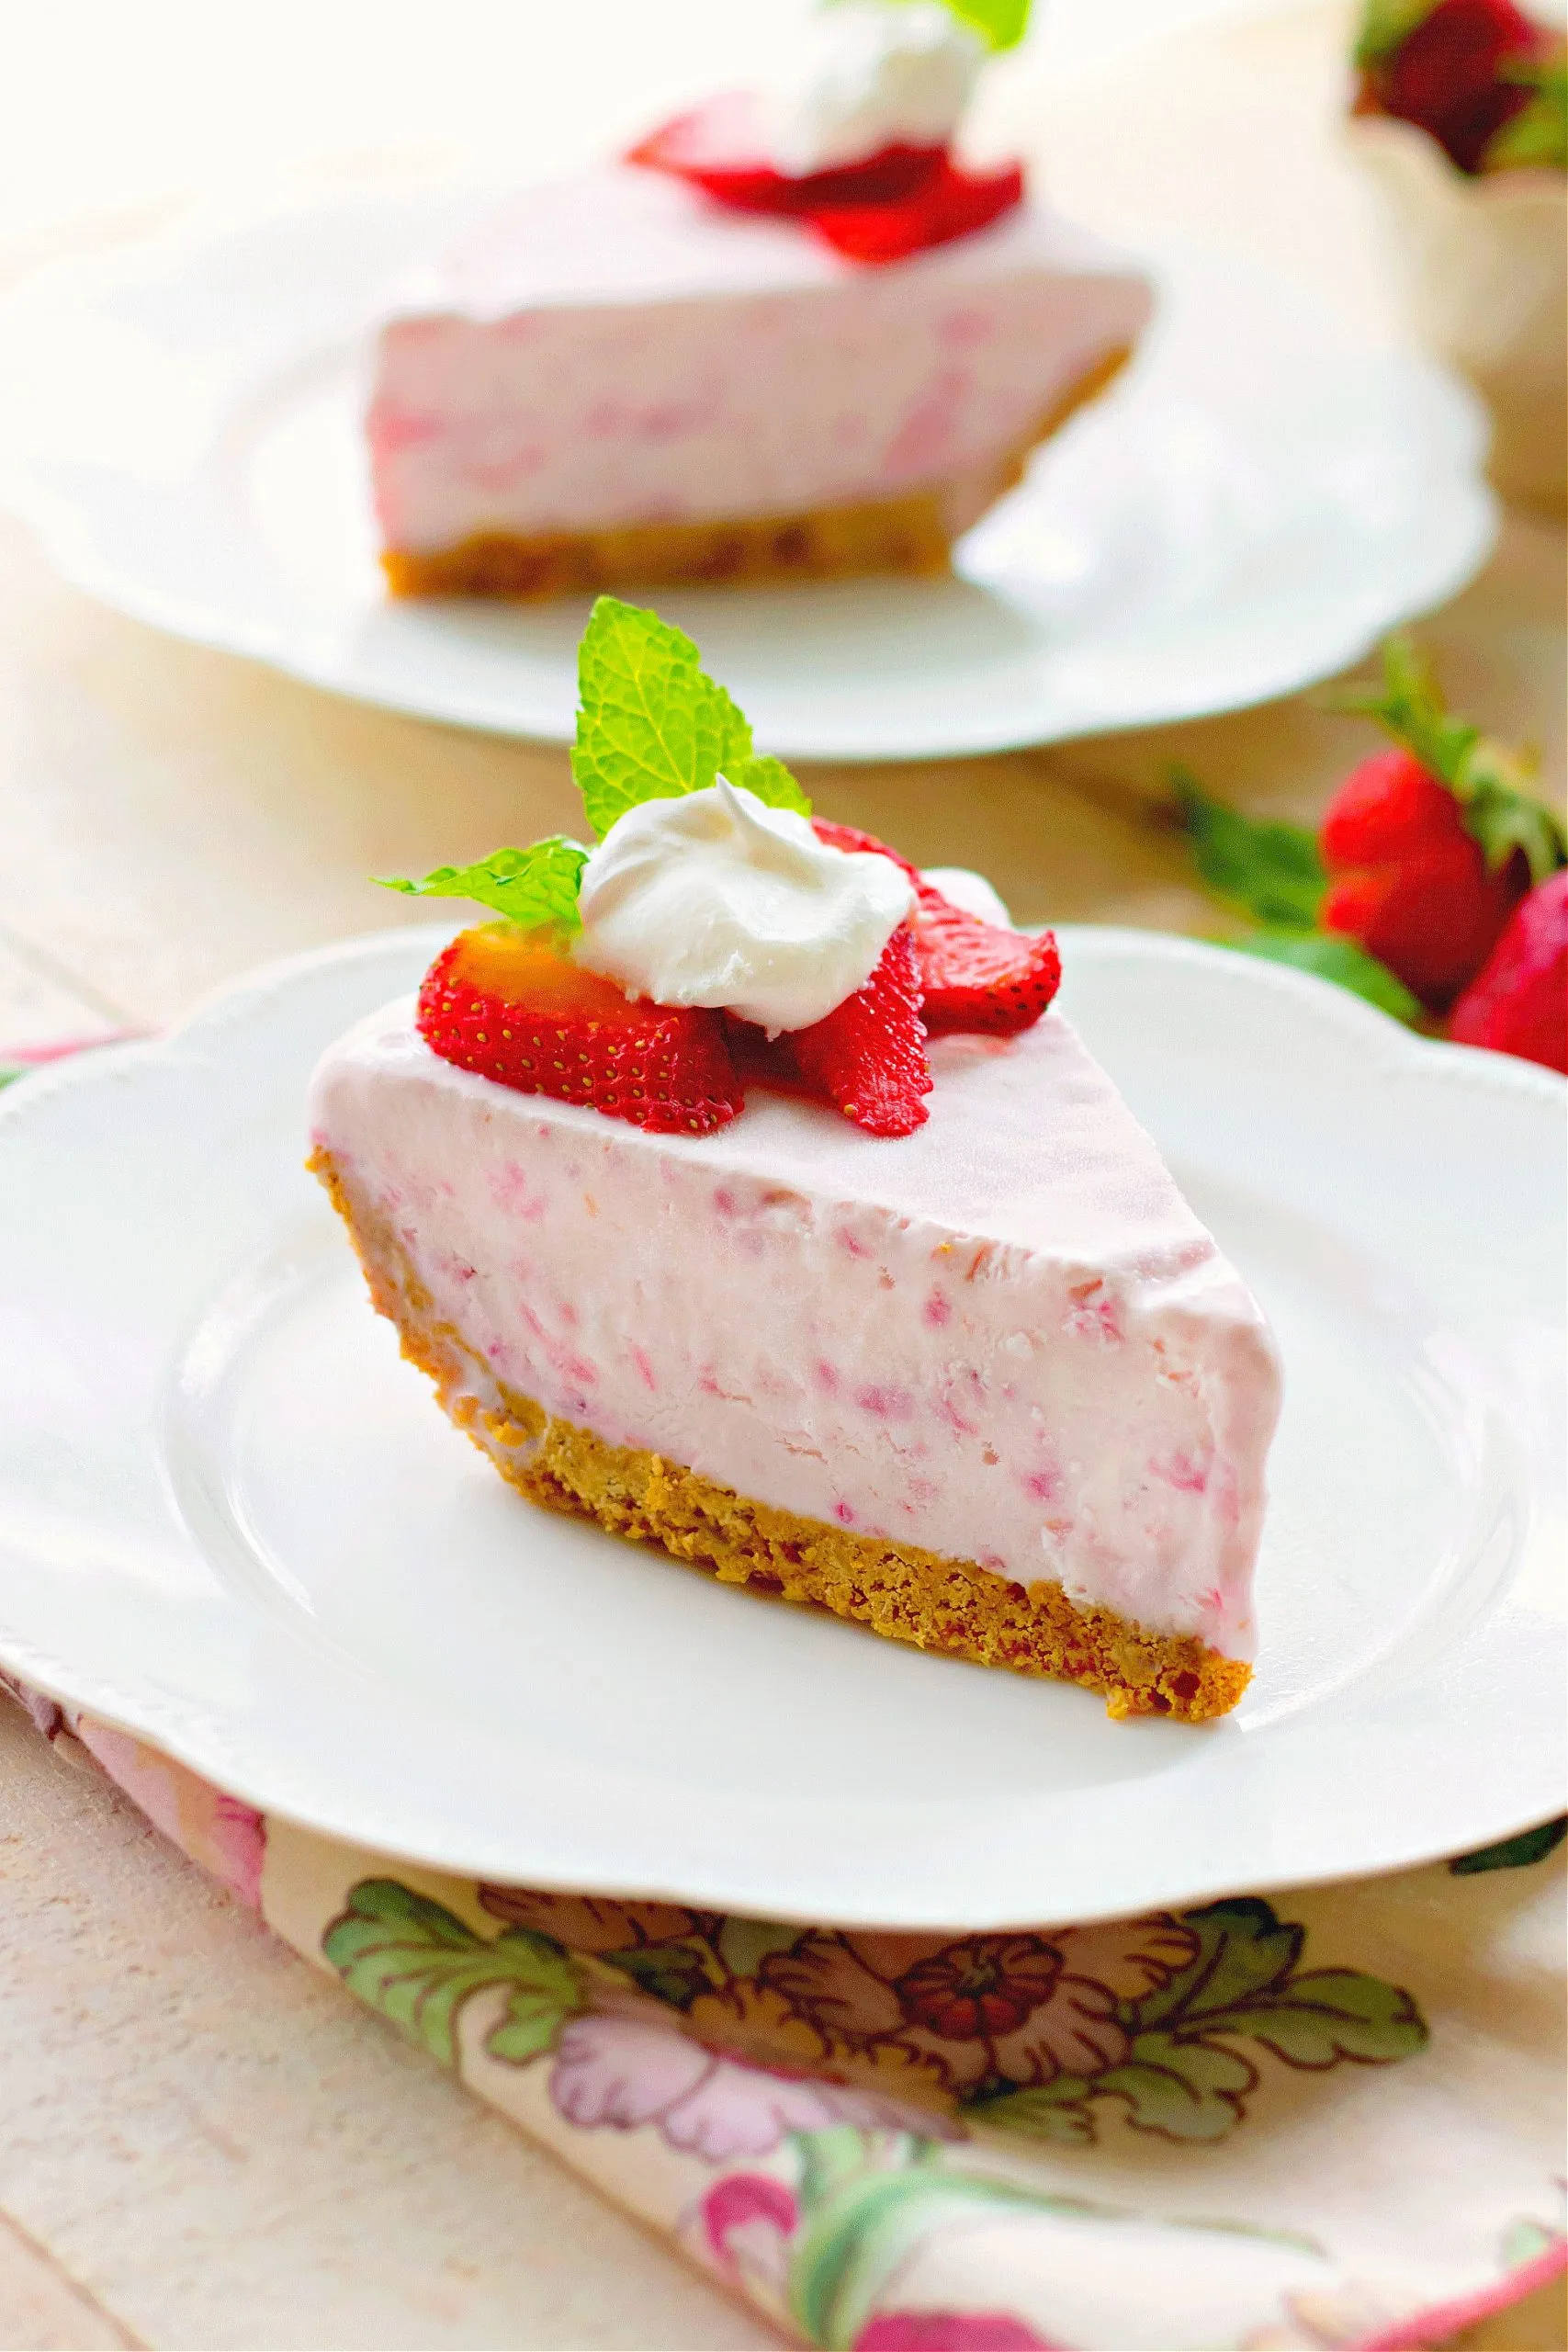 Slice of frozen strawberry cream pie with graham cracker crust on a white plate.  The slice of pie is garnished with slices of fresh strawberries and whipped cream.